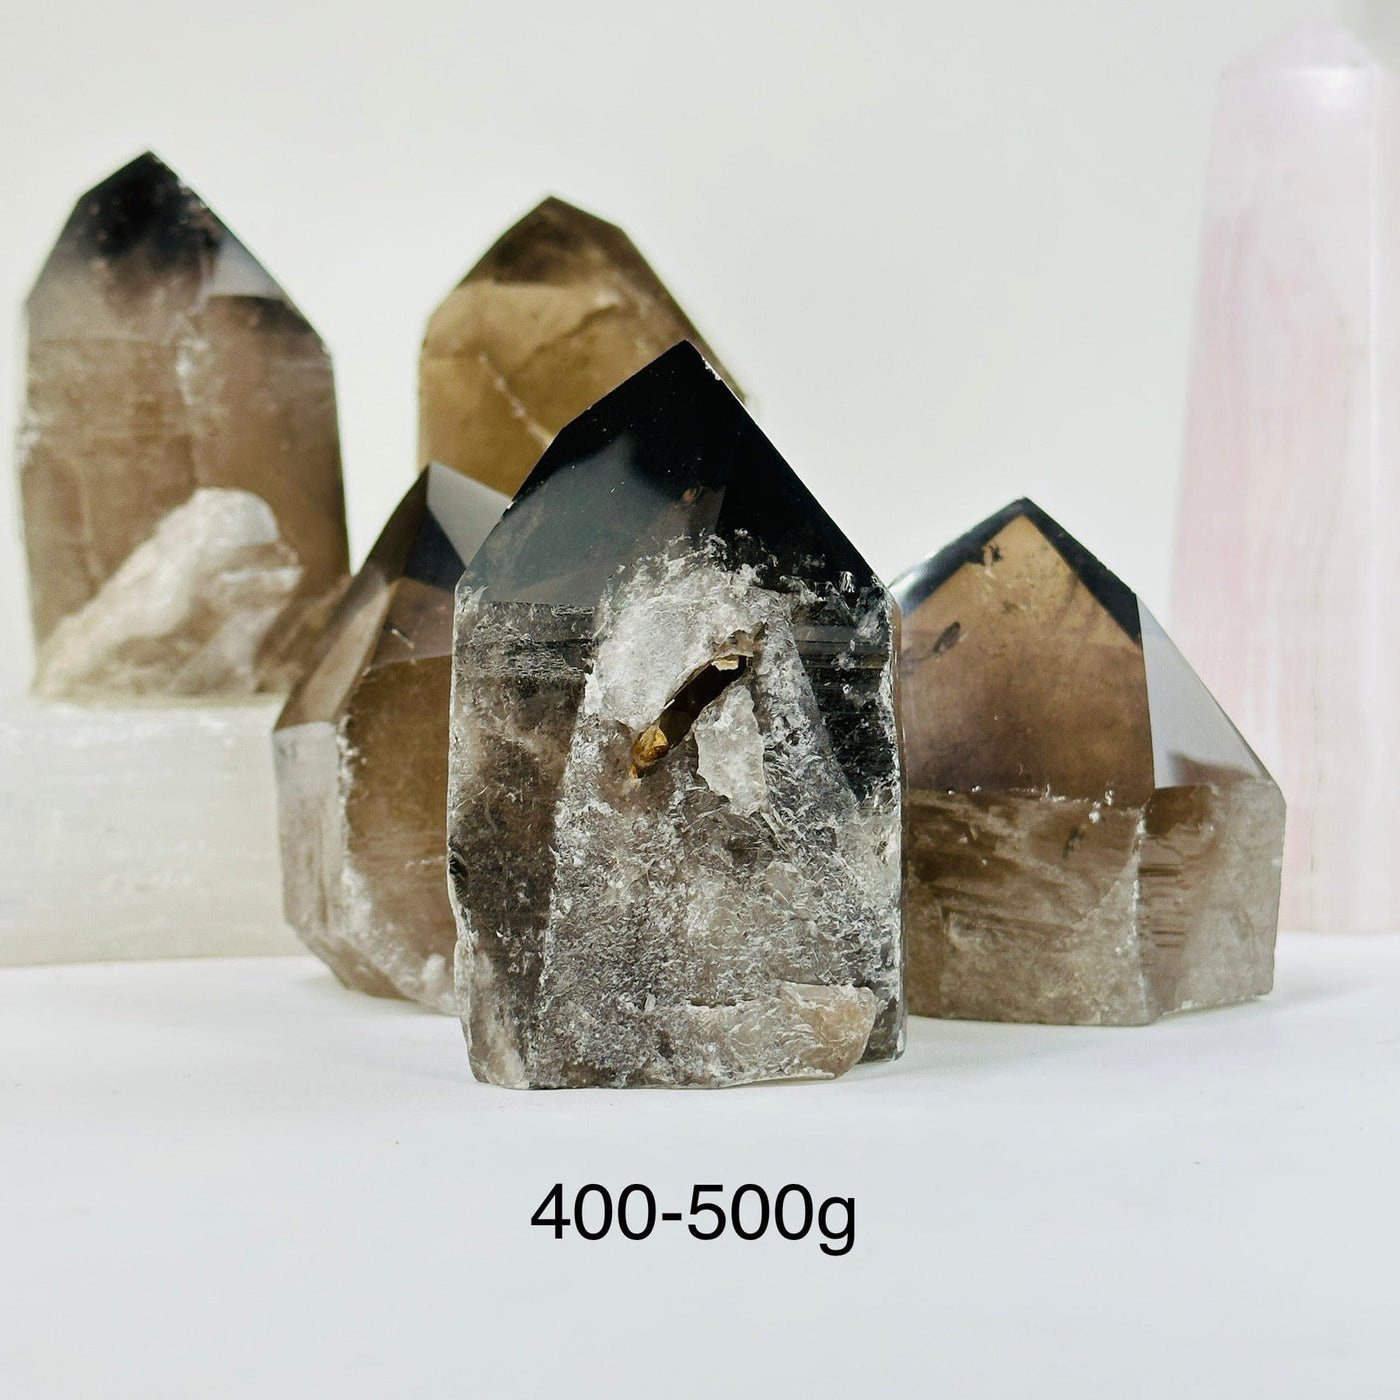 400-500g smoky quartz semi polished point with decorations in the background